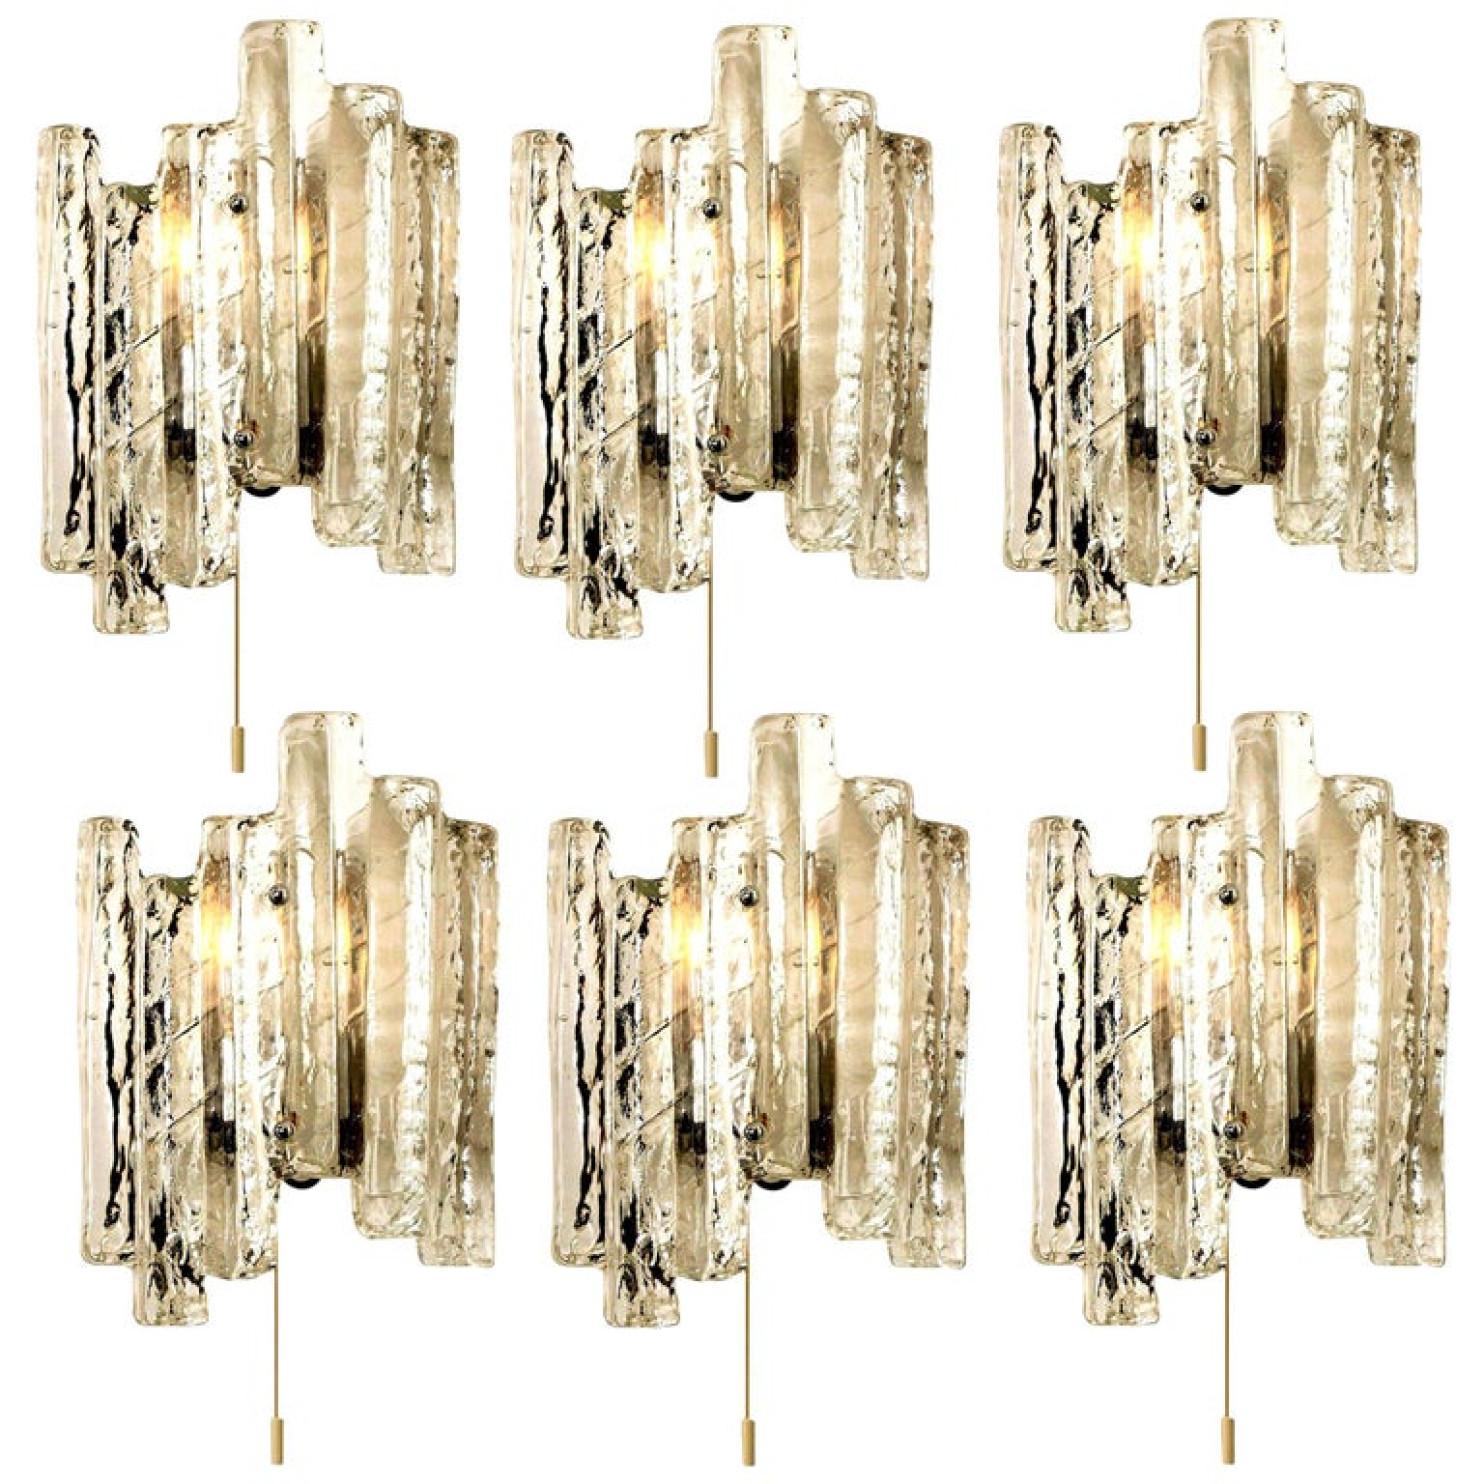 One of the six elegant modern high-end large brassed topped metal lights or sconces, Austria in the 1970s. Lovely design, executed to a very high standard. Each wall light has four solid ice glass sheets dangling on it. Clean lines to complement all